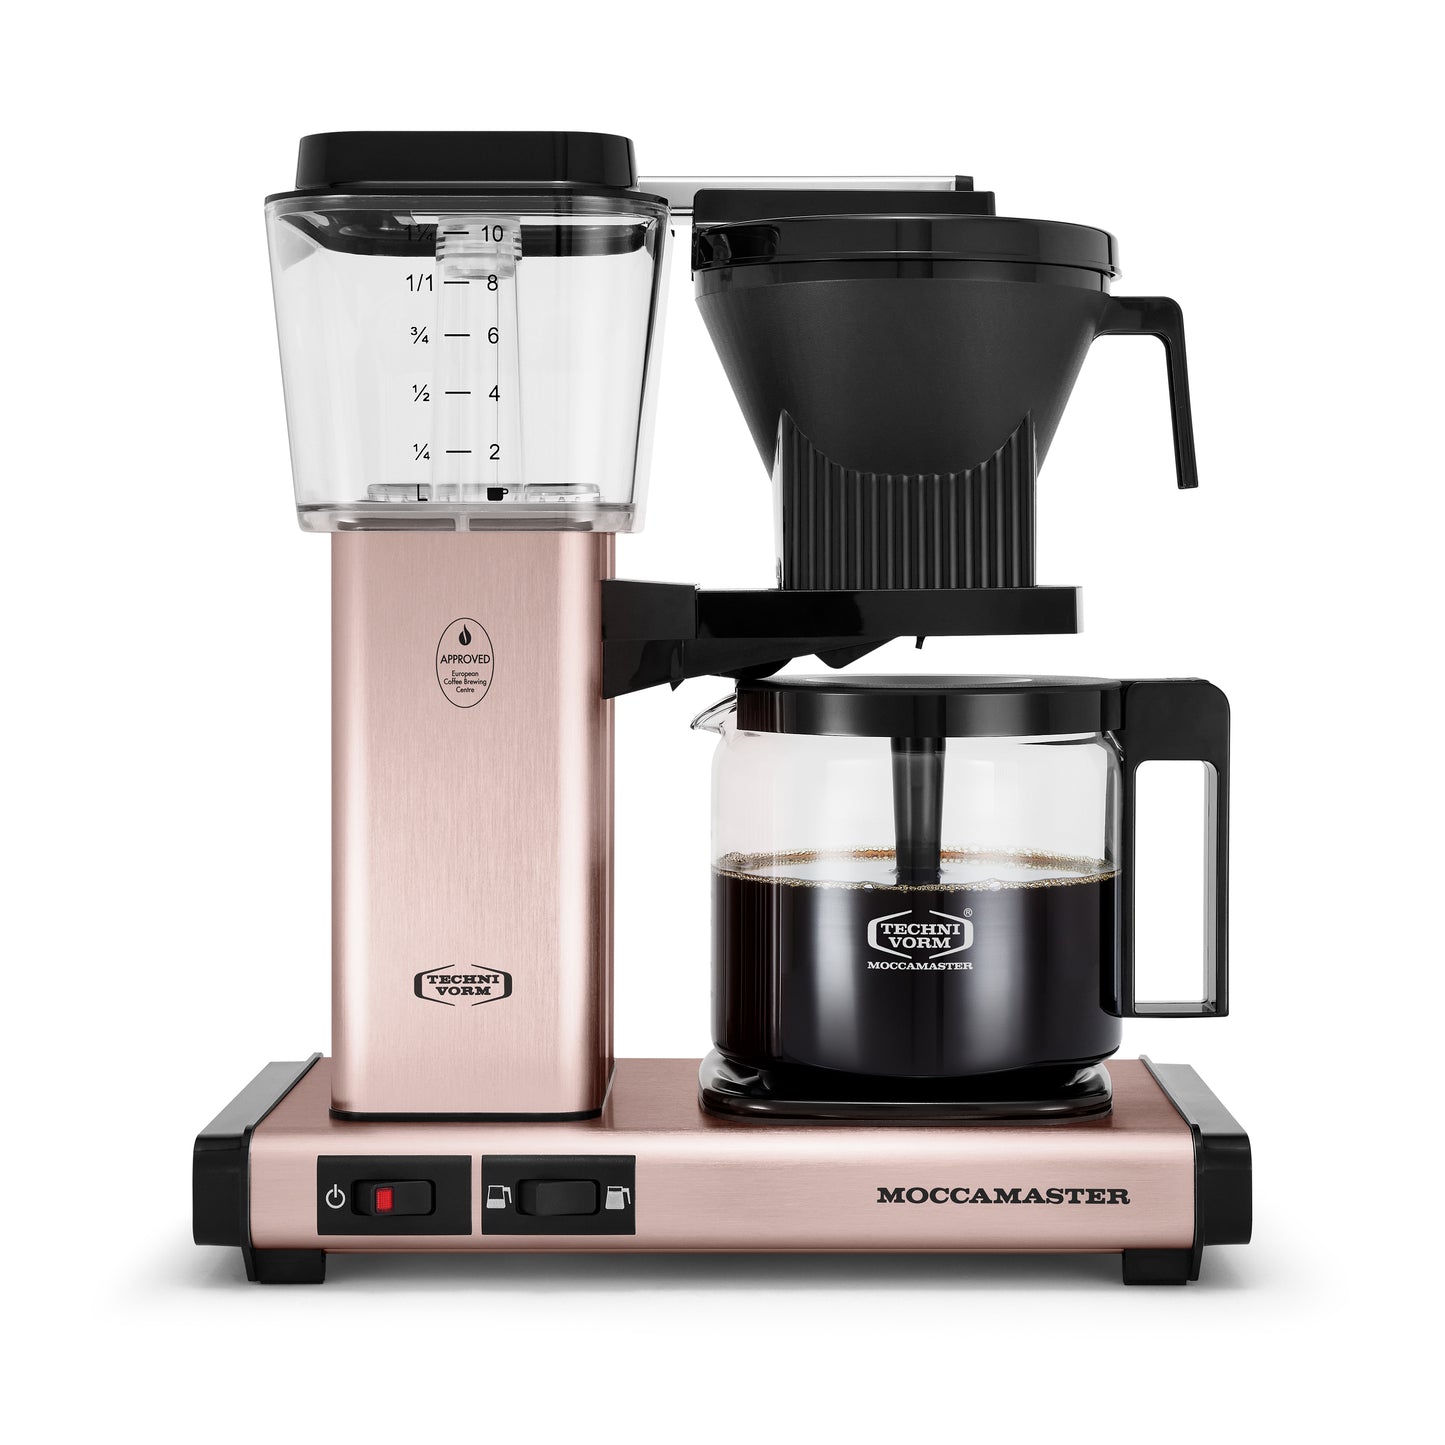 Technivorm Moccamaster Cup-One Coffee Brewer